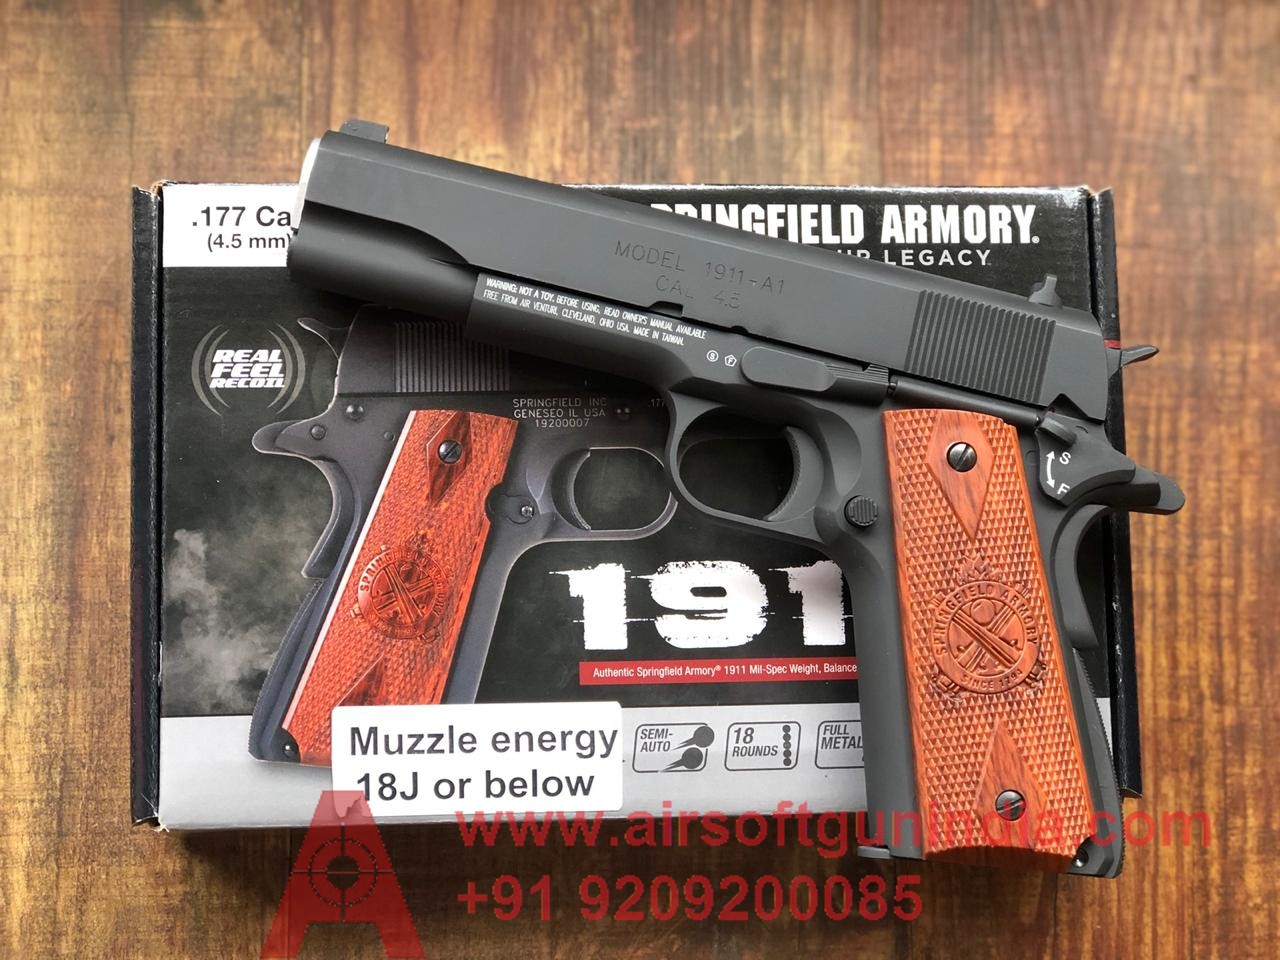 Springfield Armory 1911 Mil-Spec. CO2 .177 BB Gun In India